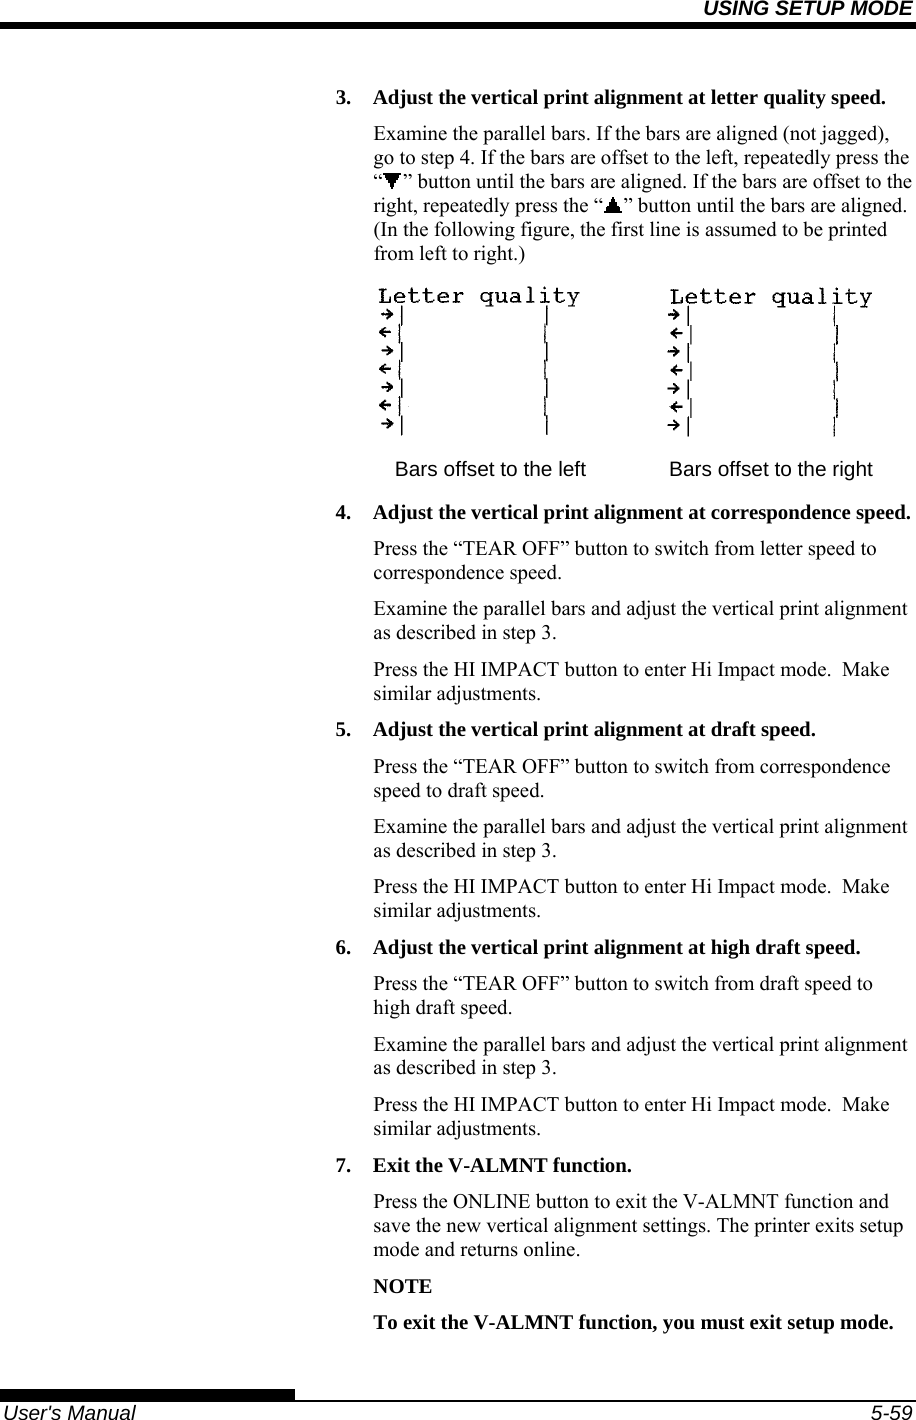 USING SETUP MODE   User&apos;s Manual  5-59 3.  Adjust the vertical print alignment at letter quality speed. Examine the parallel bars. If the bars are aligned (not jagged), go to step 4. If the bars are offset to the left, repeatedly press the “” button until the bars are aligned. If the bars are offset to the right, repeatedly press the “ ” button until the bars are aligned. (In the following figure, the first line is assumed to be printed from left to right.)    Bars offset to the left  Bars offset to the right 4.  Adjust the vertical print alignment at correspondence speed. Press the “TEAR OFF” button to switch from letter speed to correspondence speed. Examine the parallel bars and adjust the vertical print alignment as described in step 3. Press the HI IMPACT button to enter Hi Impact mode.  Make similar adjustments. 5.  Adjust the vertical print alignment at draft speed. Press the “TEAR OFF” button to switch from correspondence speed to draft speed. Examine the parallel bars and adjust the vertical print alignment as described in step 3. Press the HI IMPACT button to enter Hi Impact mode.  Make similar adjustments. 6.  Adjust the vertical print alignment at high draft speed. Press the “TEAR OFF” button to switch from draft speed to high draft speed. Examine the parallel bars and adjust the vertical print alignment as described in step 3. Press the HI IMPACT button to enter Hi Impact mode.  Make similar adjustments. 7.  Exit the V-ALMNT function. Press the ONLINE button to exit the V-ALMNT function and save the new vertical alignment settings. The printer exits setup mode and returns online. NOTE To exit the V-ALMNT function, you must exit setup mode. 